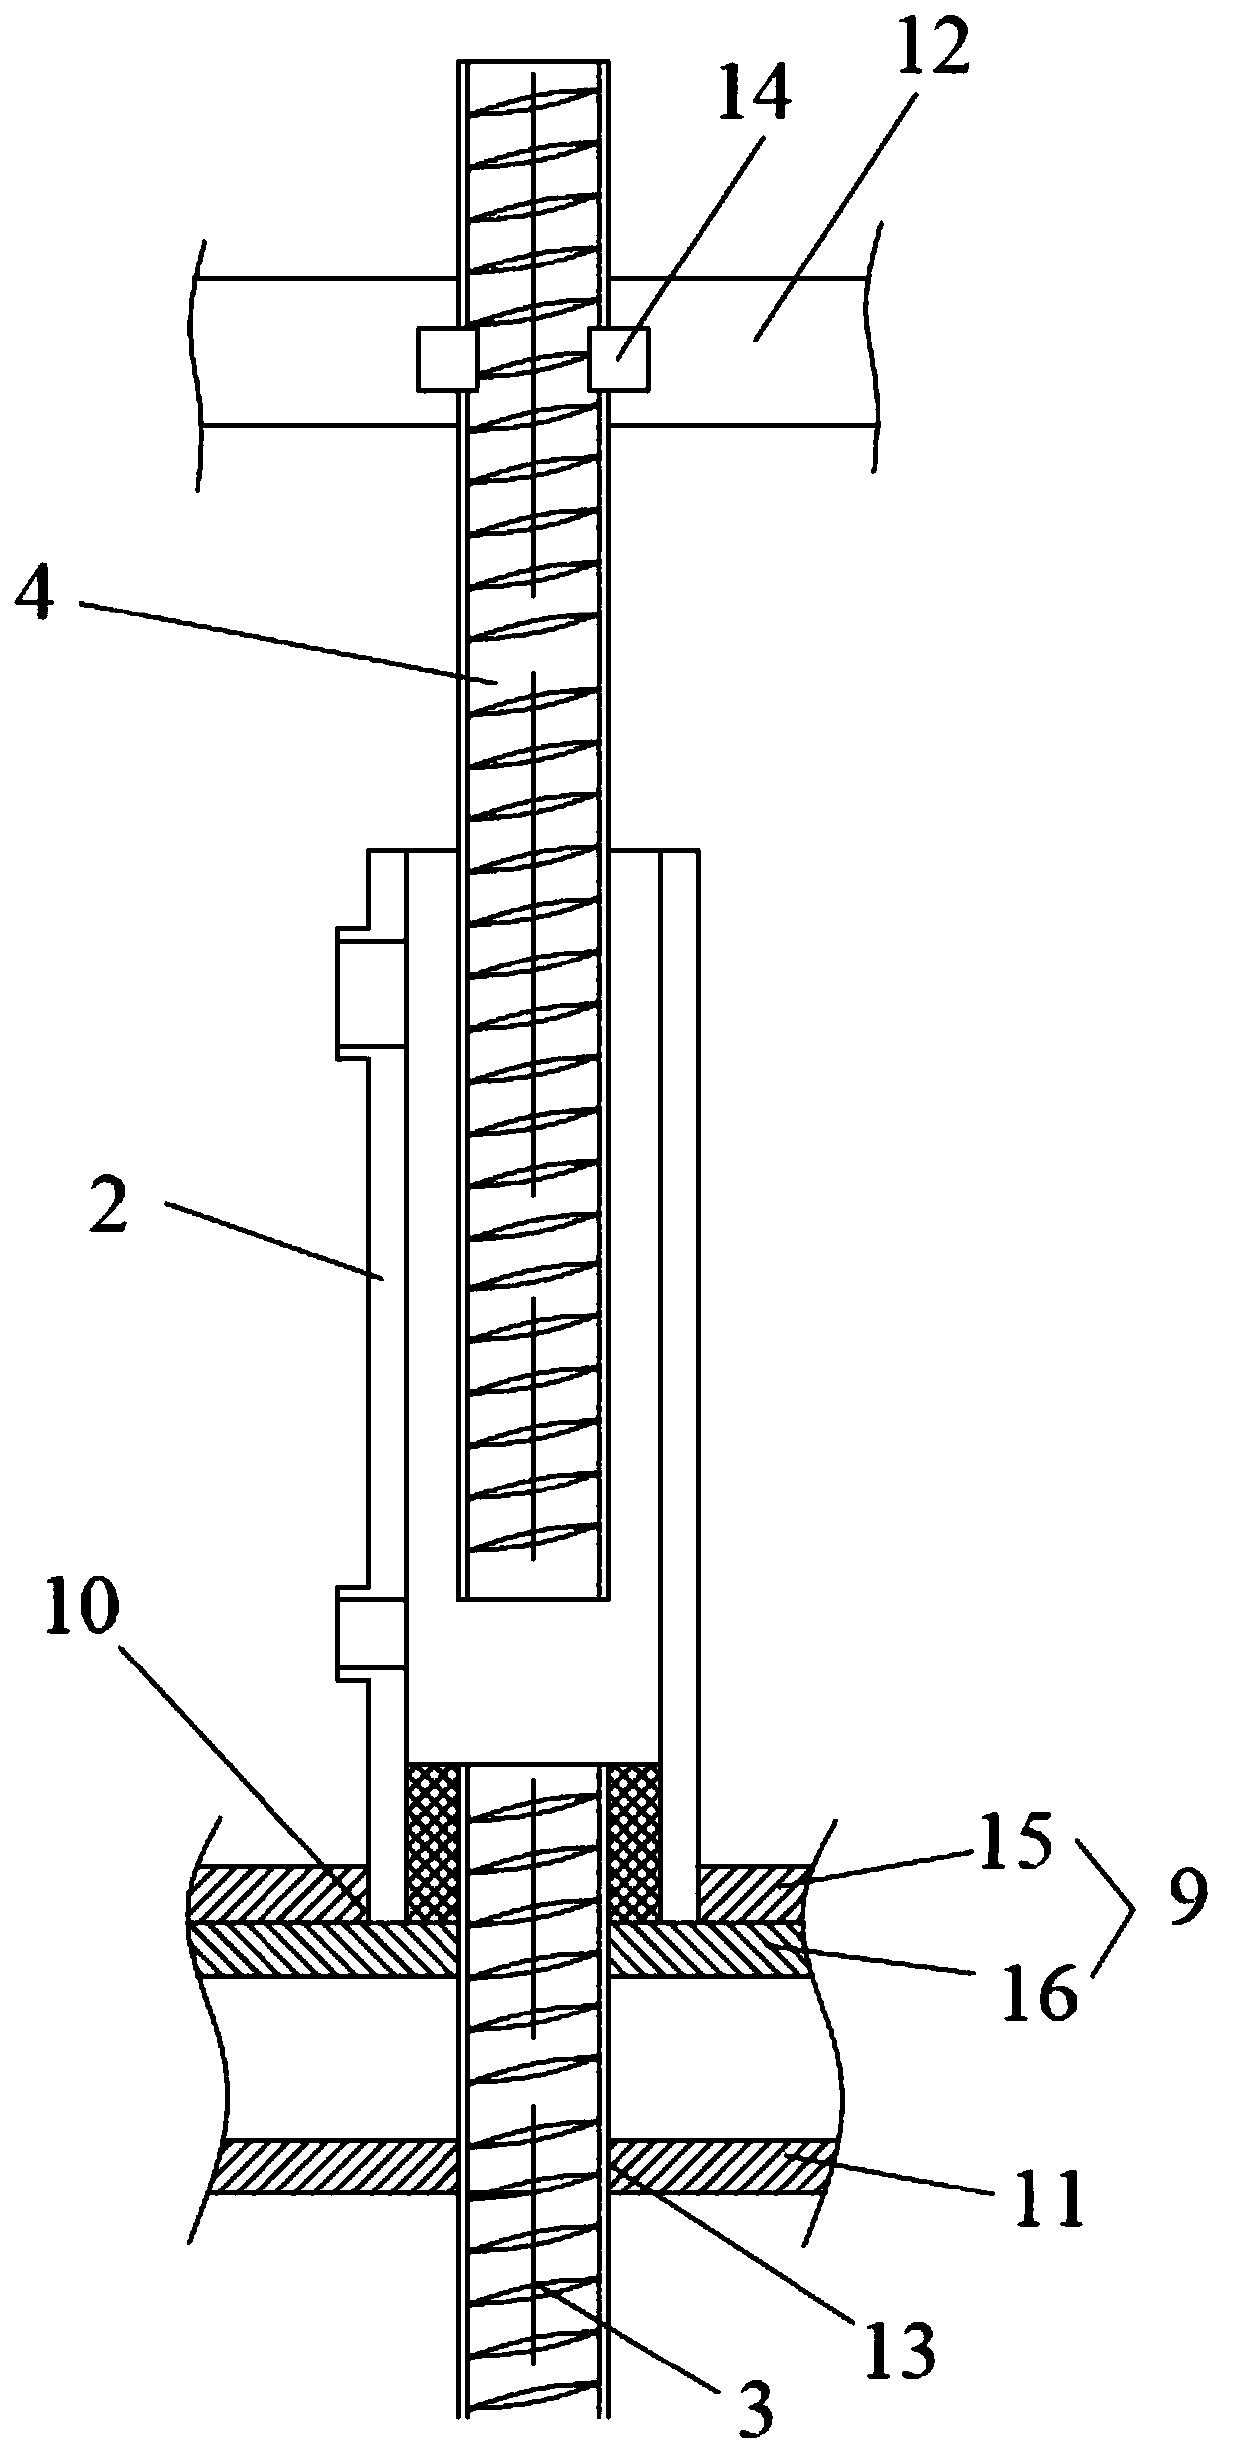 Method for manufacturing semi-grouting sleeve rebar joint for accurately controlling grout plumpness